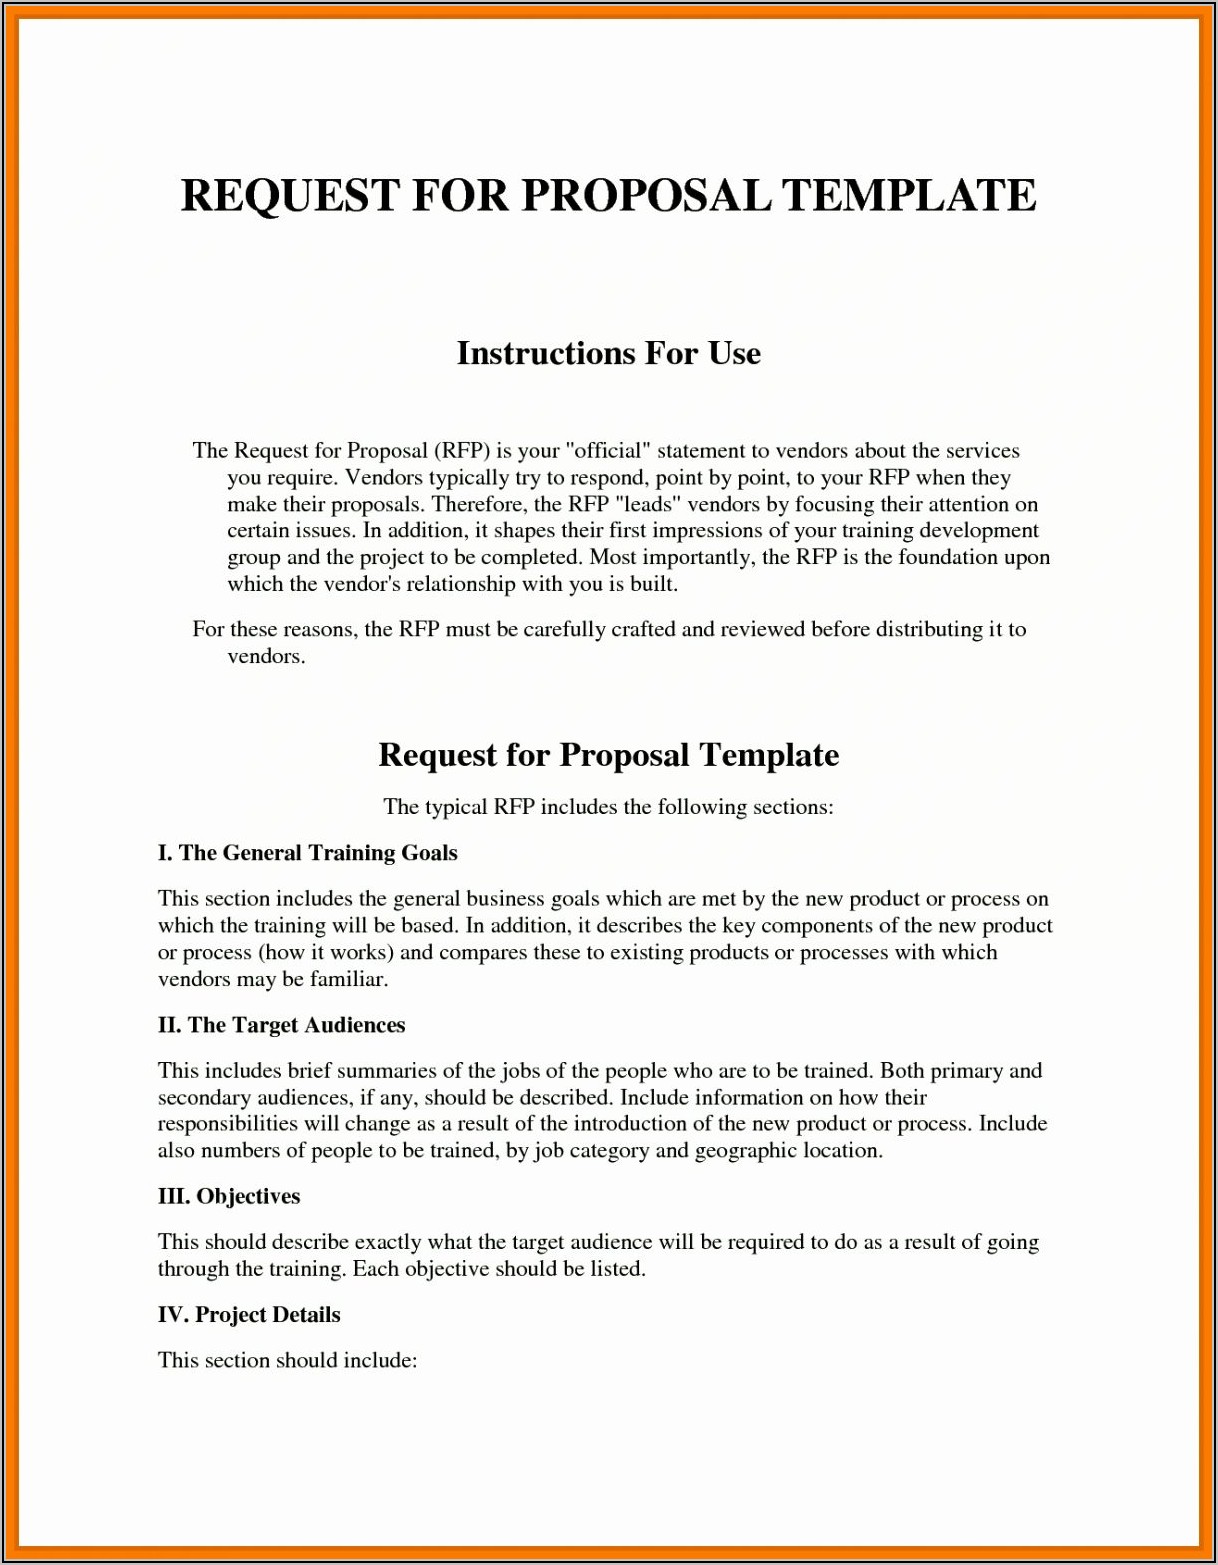 Request For Proposal Construction Rfp Template